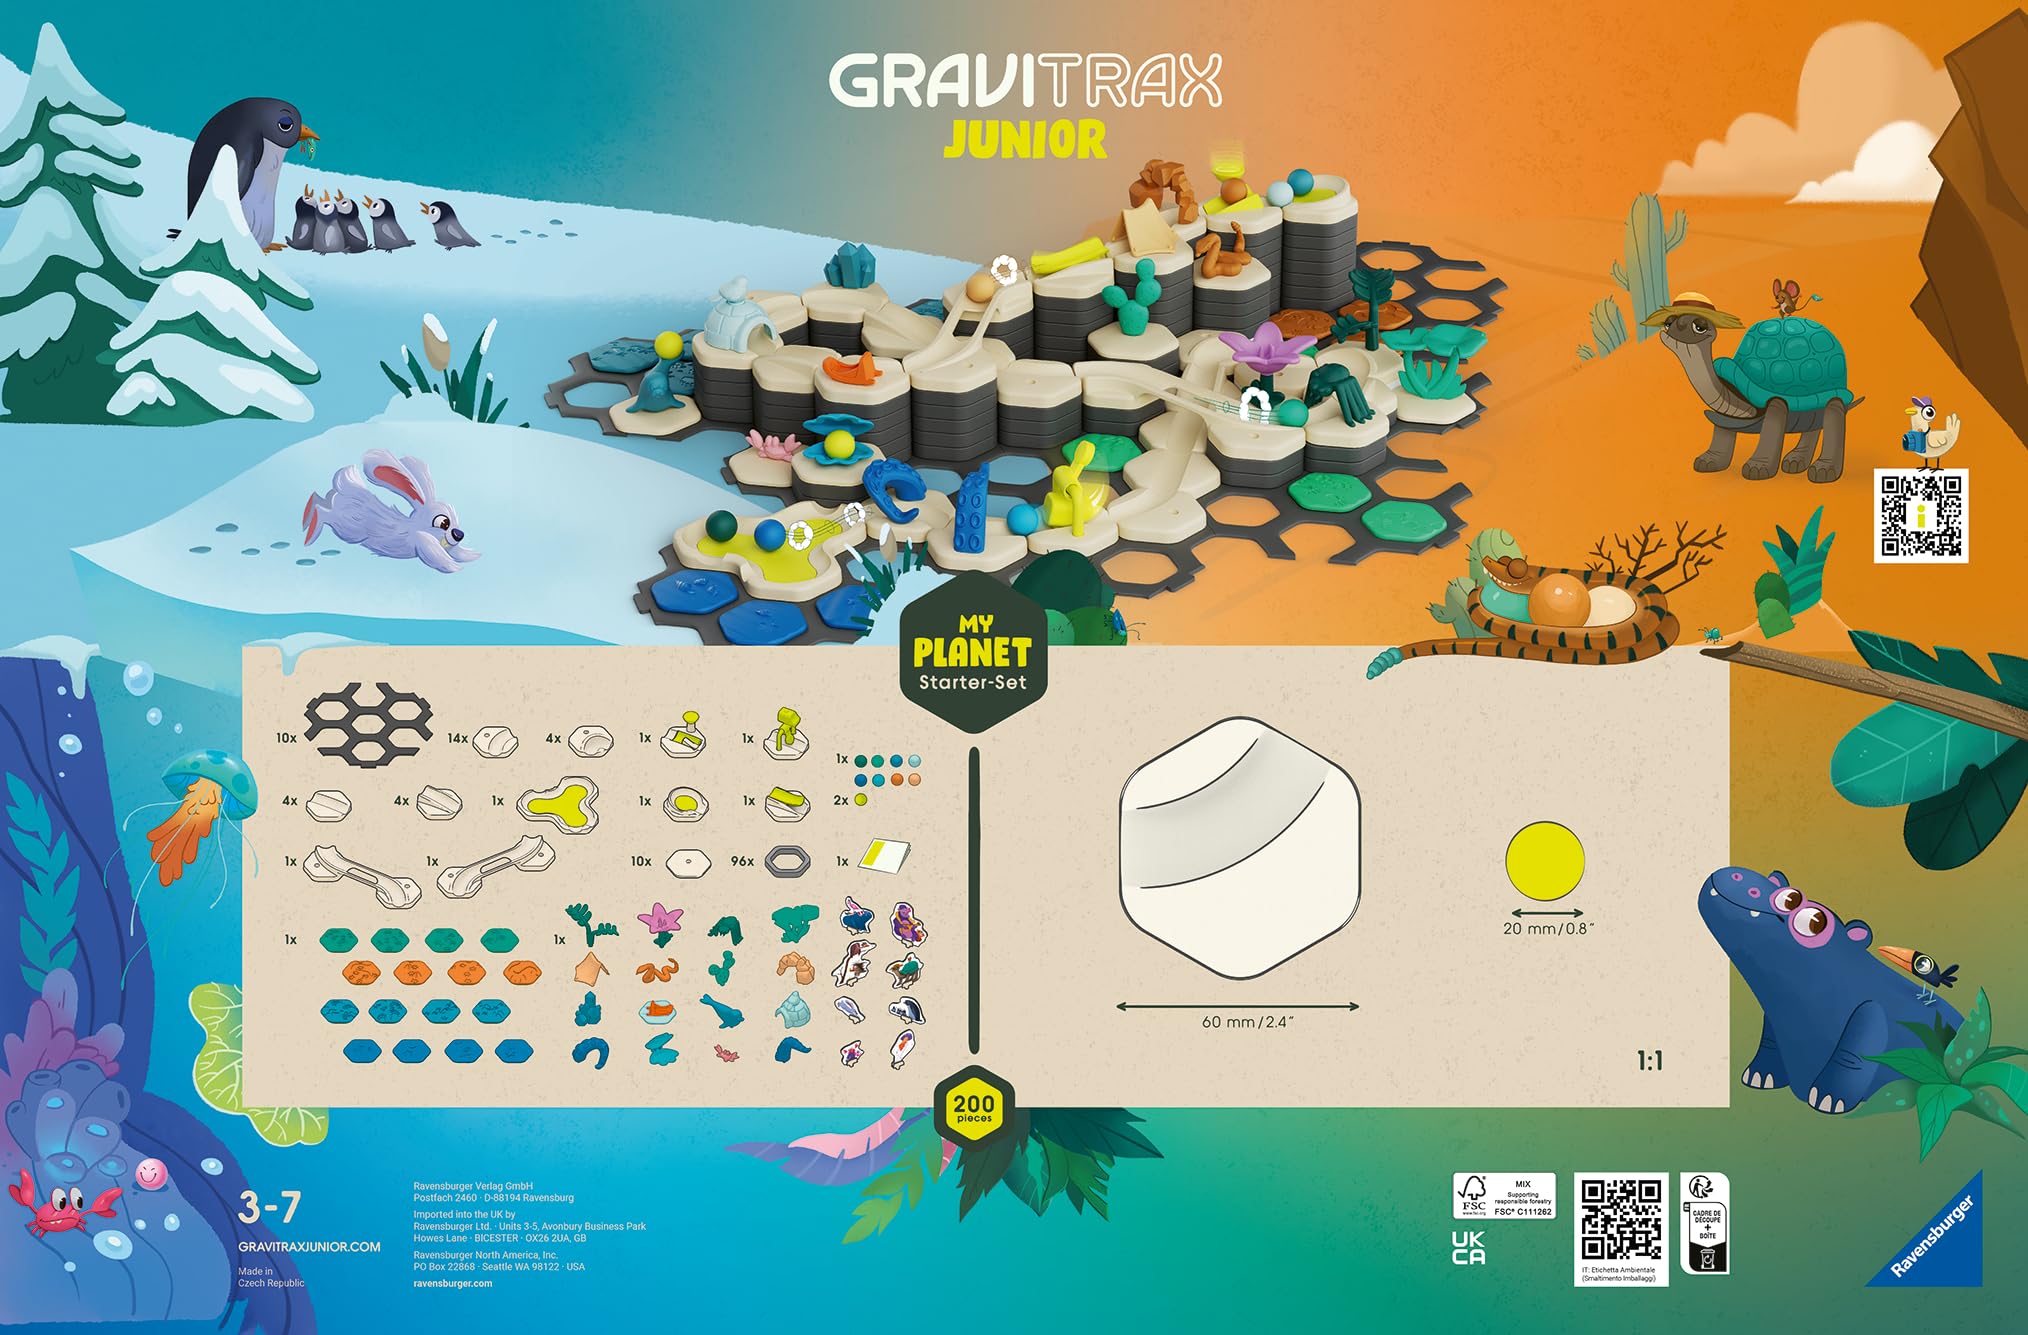 Ravensburger - Gravitrax Junior - Starter Set XXL My Planet 200 pieces - Ball track - Creative building game - Building ball course - From 3 years old - French version - 27059